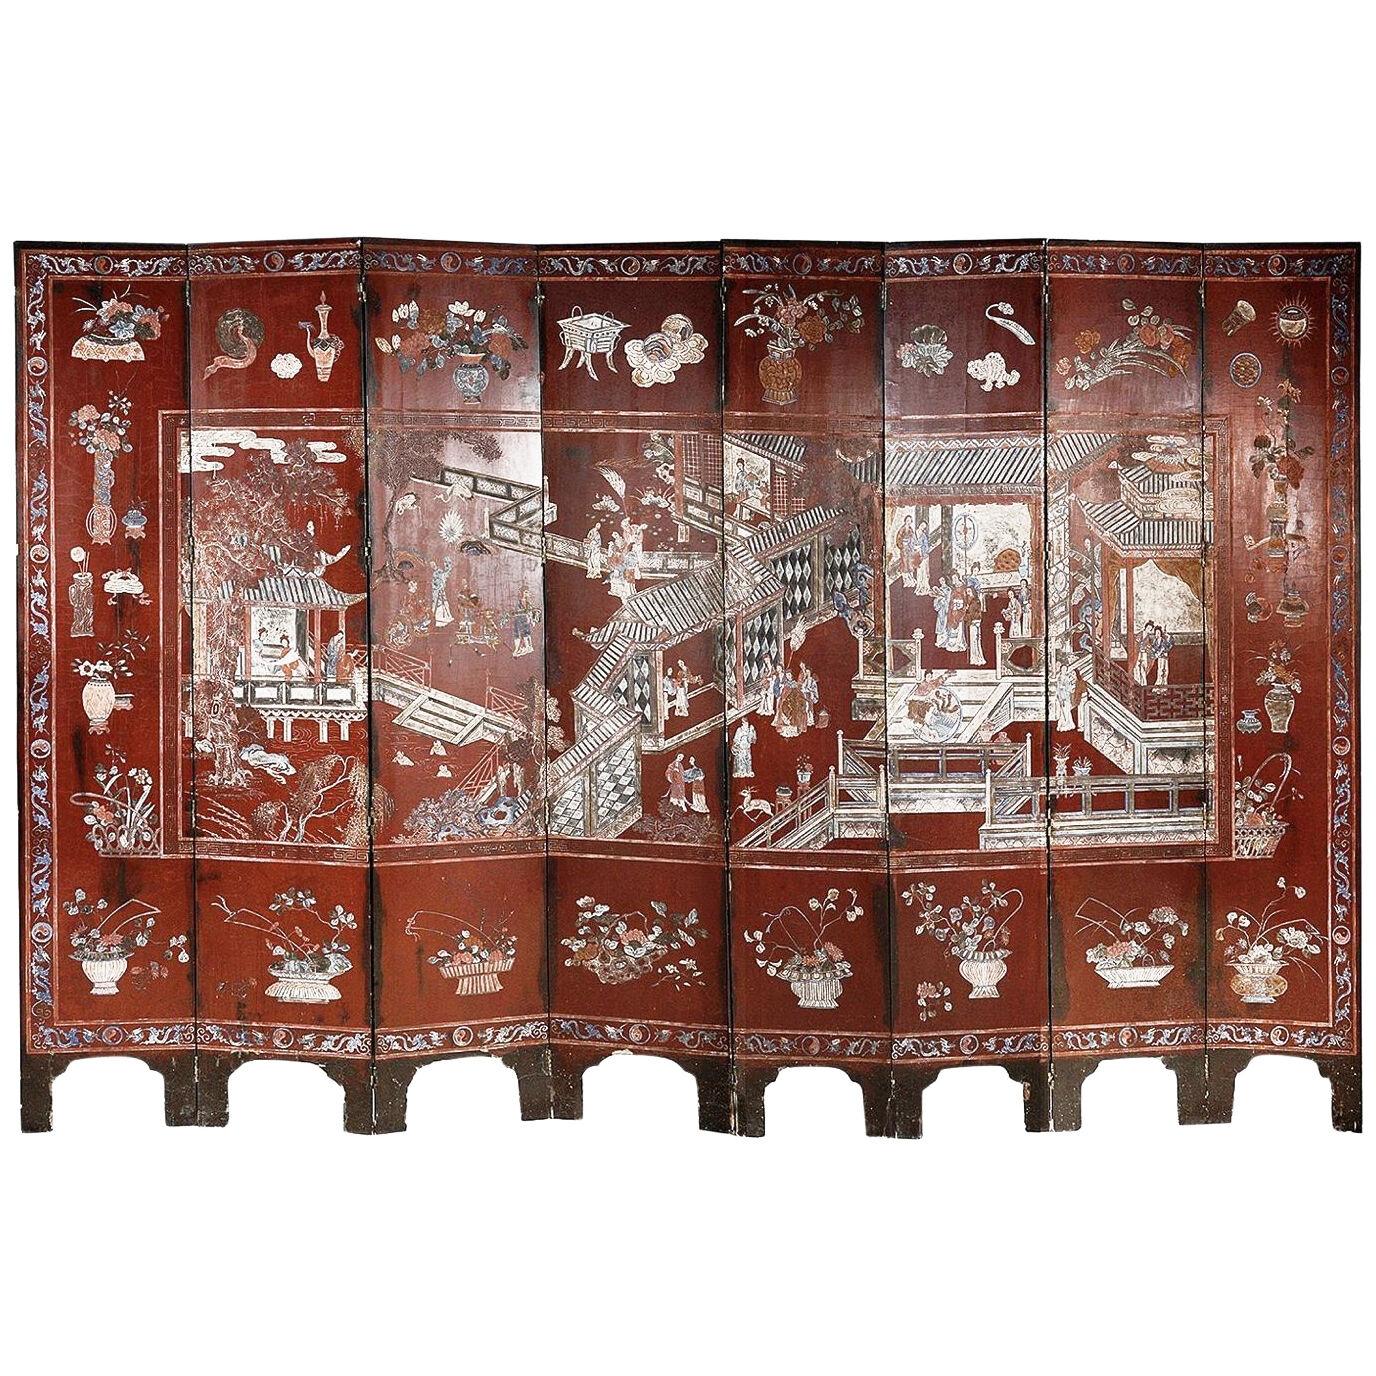 Early 19th Century Chinese Coromandel lacquer screen